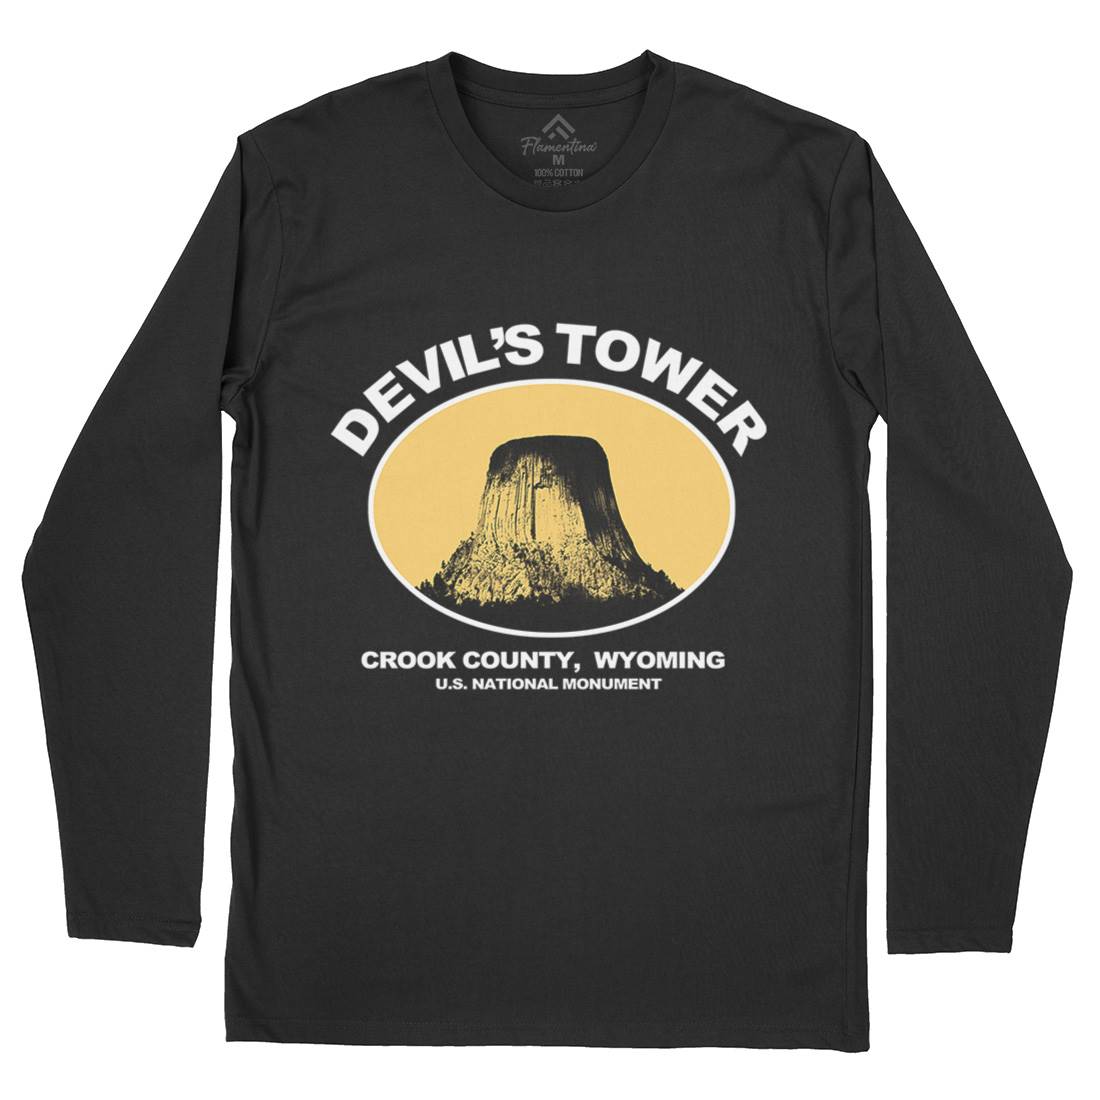 Devils Tower Mens Long Sleeve T-Shirt Space D431